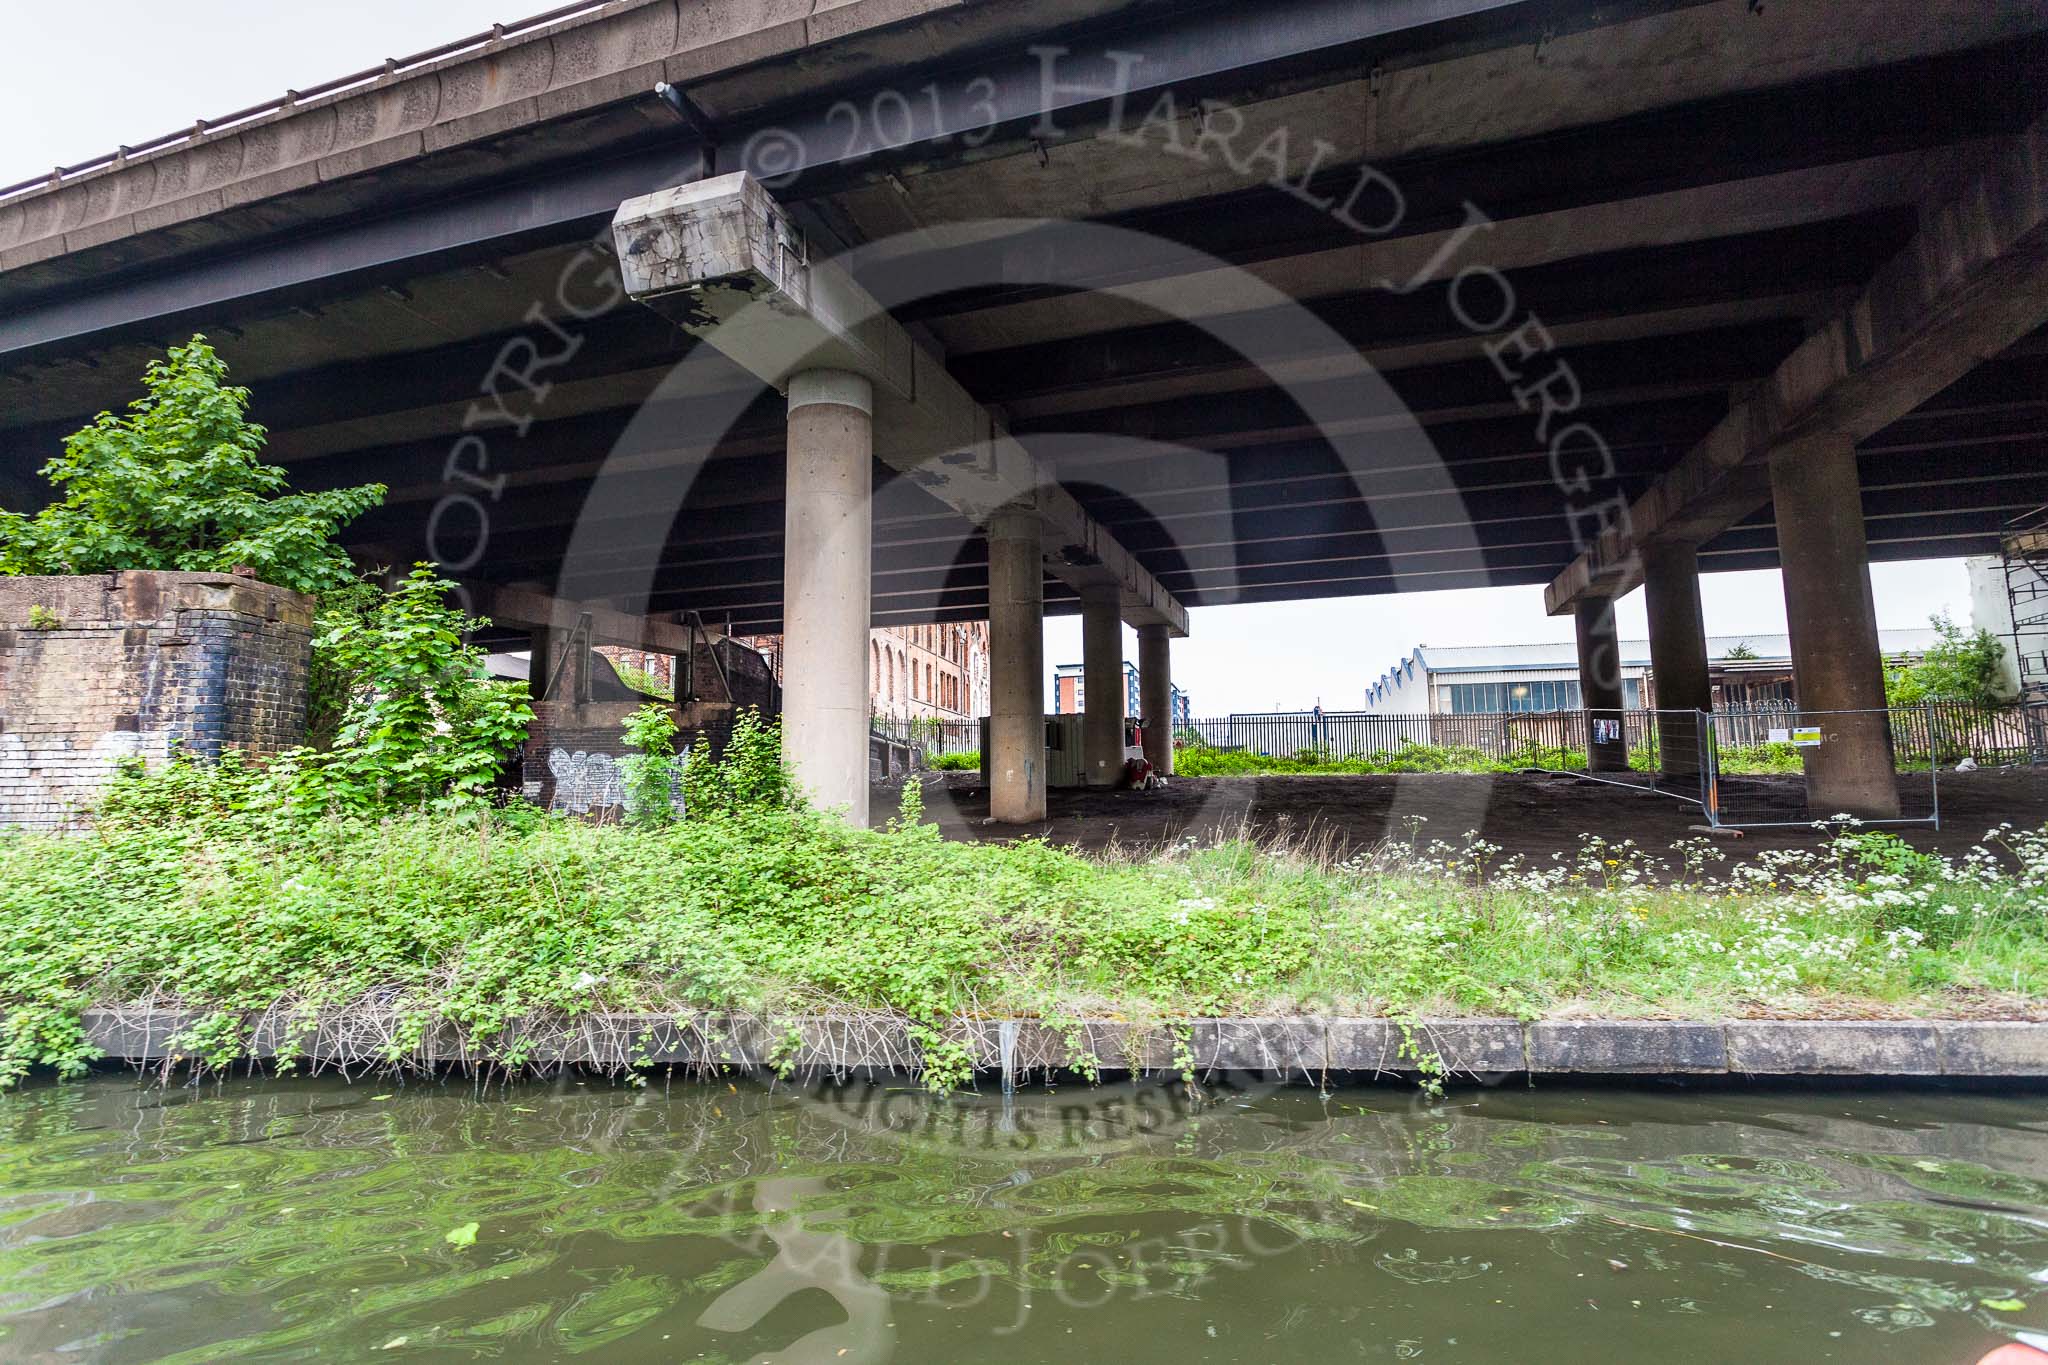 BCN 24h Marathon Challenge 2015: BCN scenery: Behind the motorway old industry on the left, newer industry on the right, and the remains of al older bridge that once spanned the canal under the motorway..
Birmingham Canal Navigations,



on 23 May 2015 at 11:40, image #92